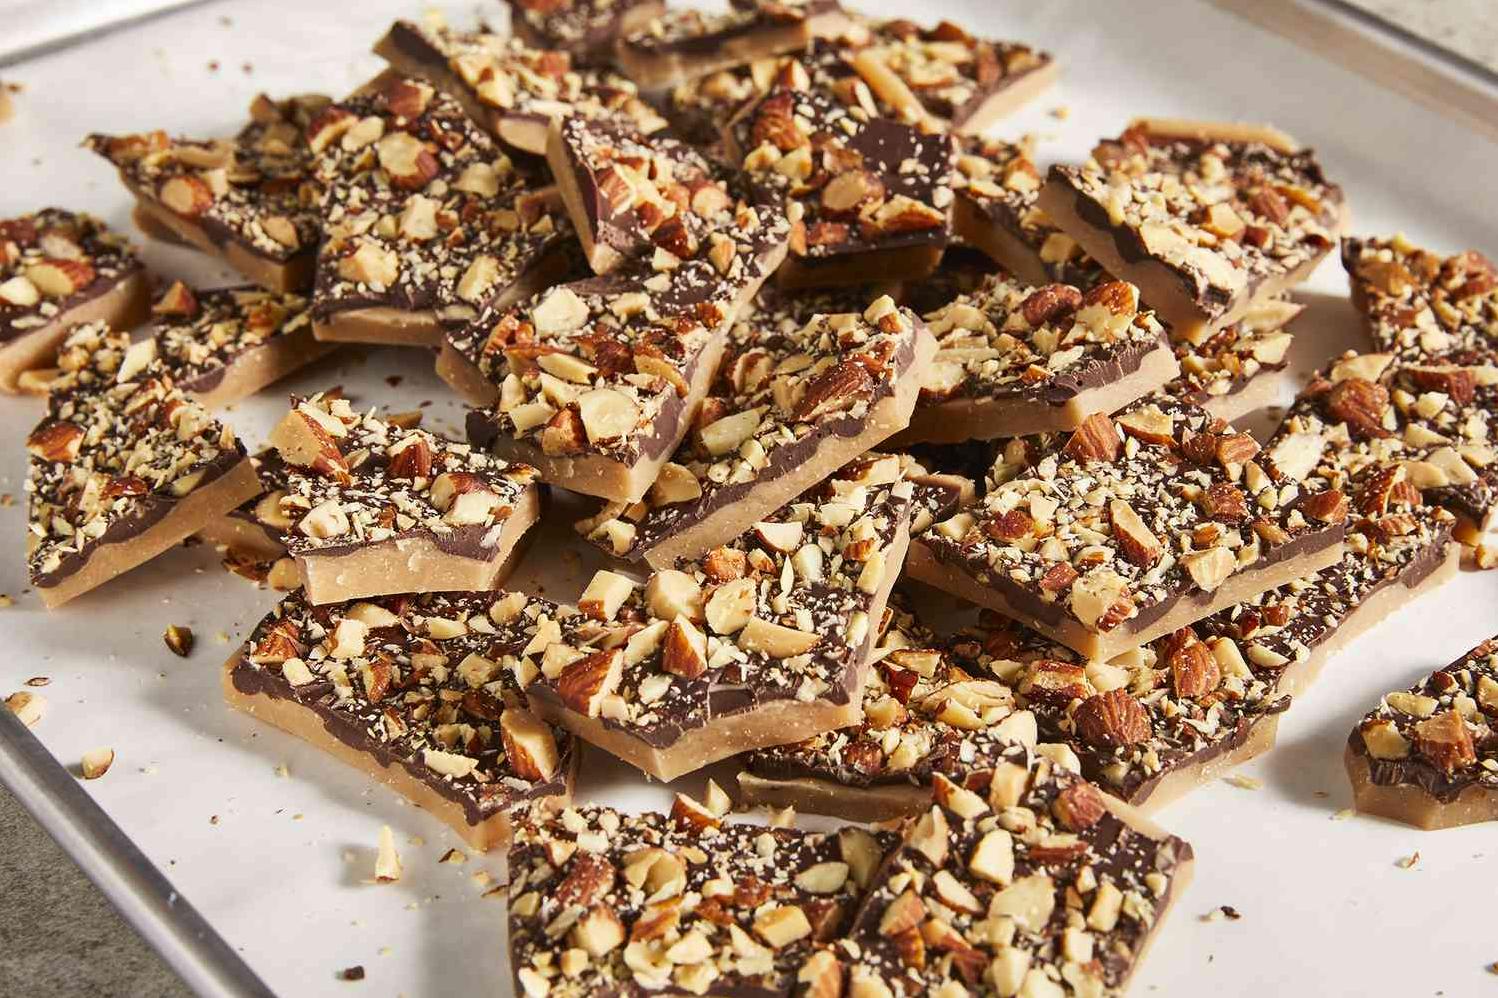  The crumbly texture of this toffee will melt in your mouth.